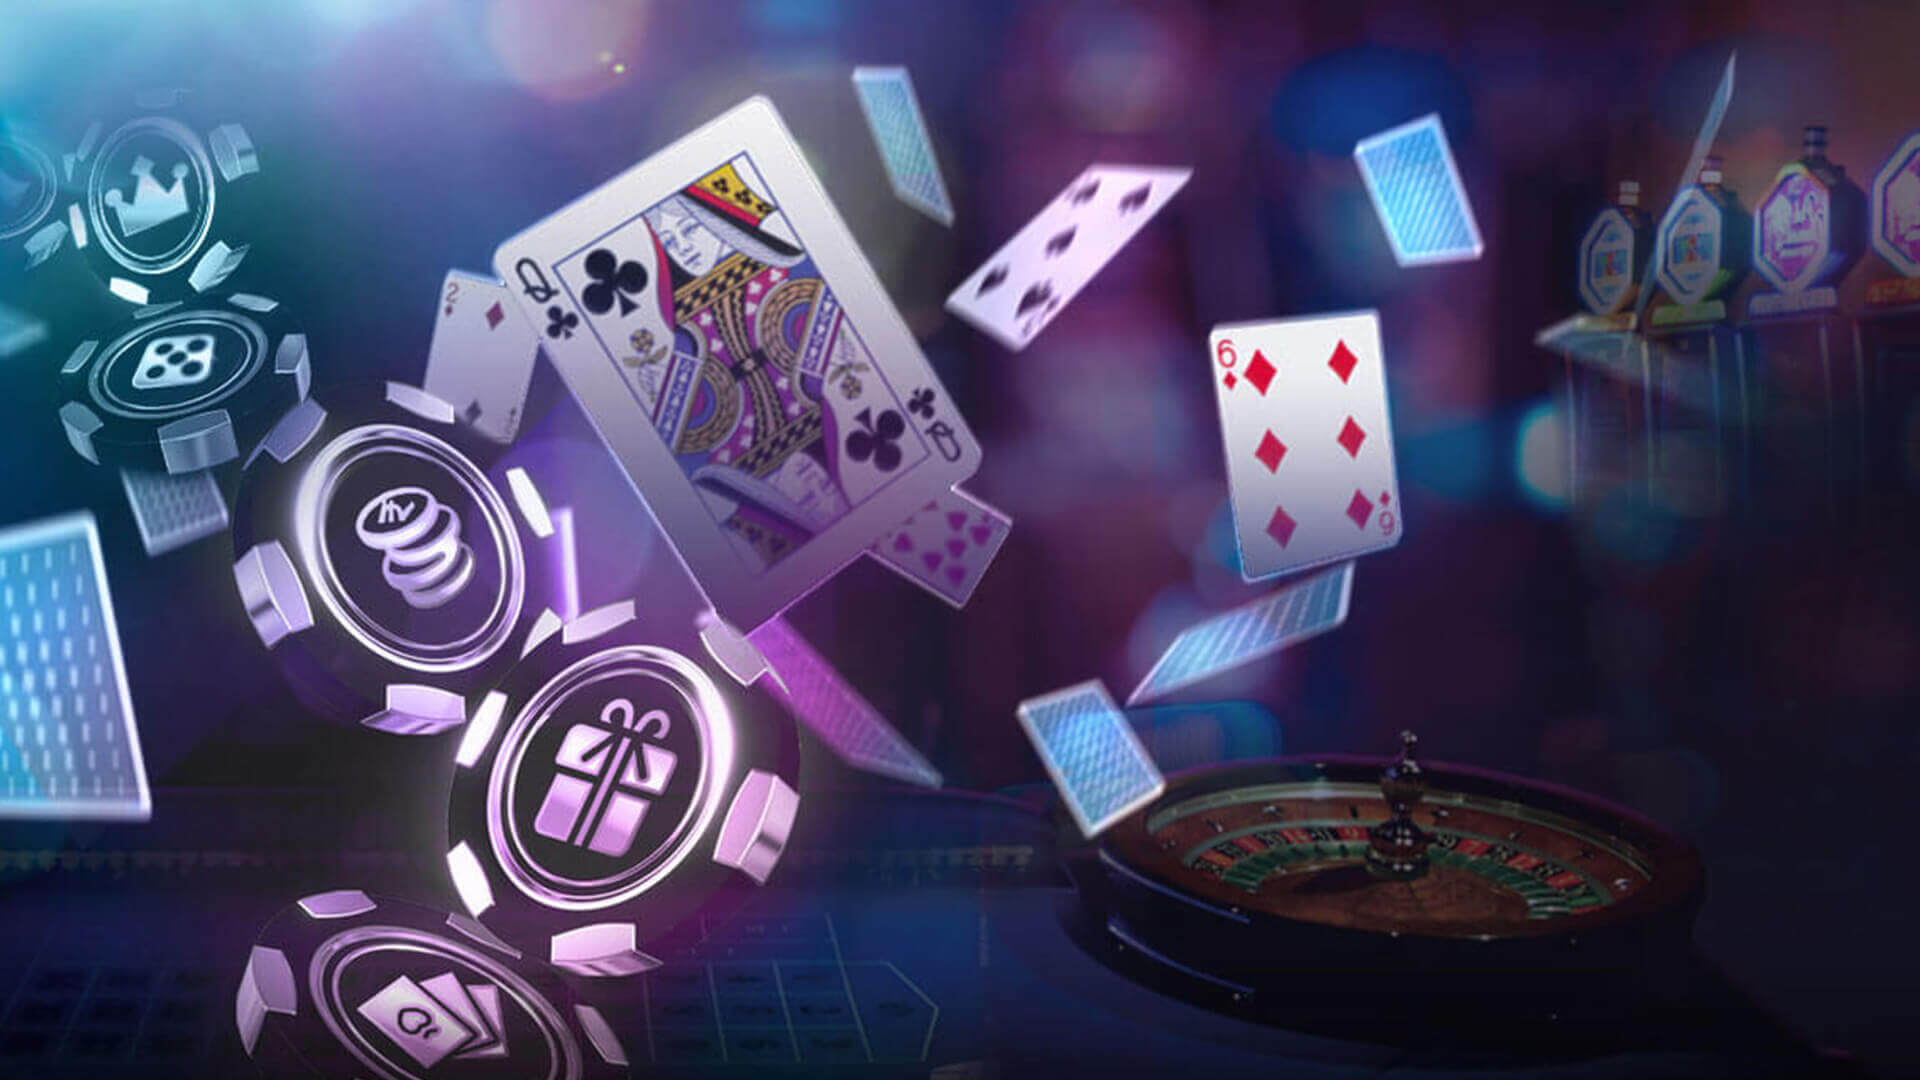 7 Ways To Keep Your casinos Growing Without Burning The Midnight Oil